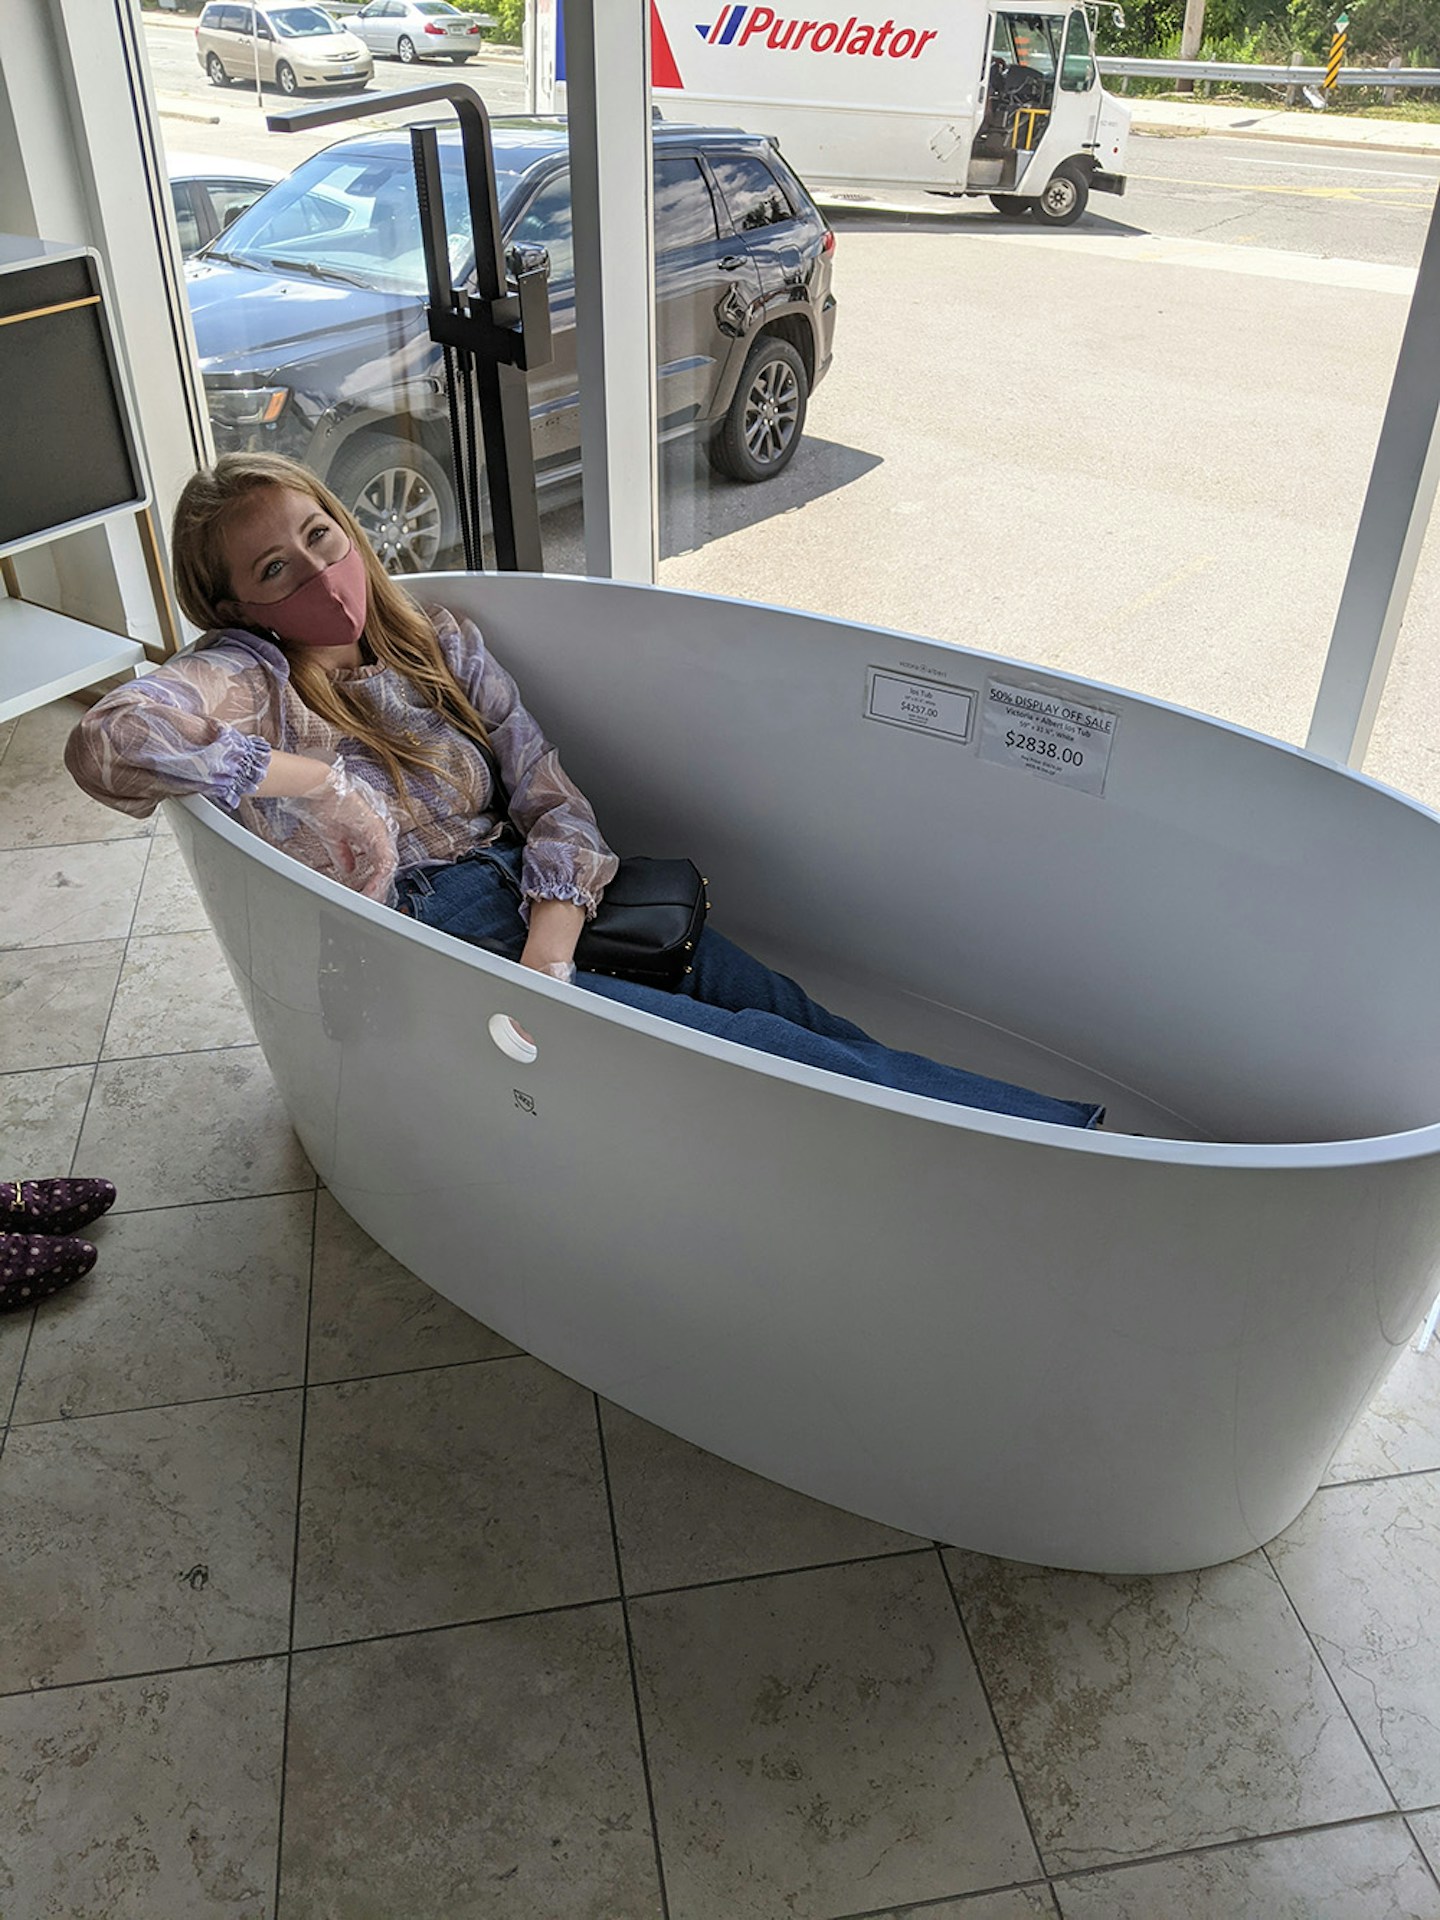 How to pick a freestanding tub: make sure you test drive your bathtub first! Try it out in a showroom to make sure it's comfortable and the size and depth feels right.